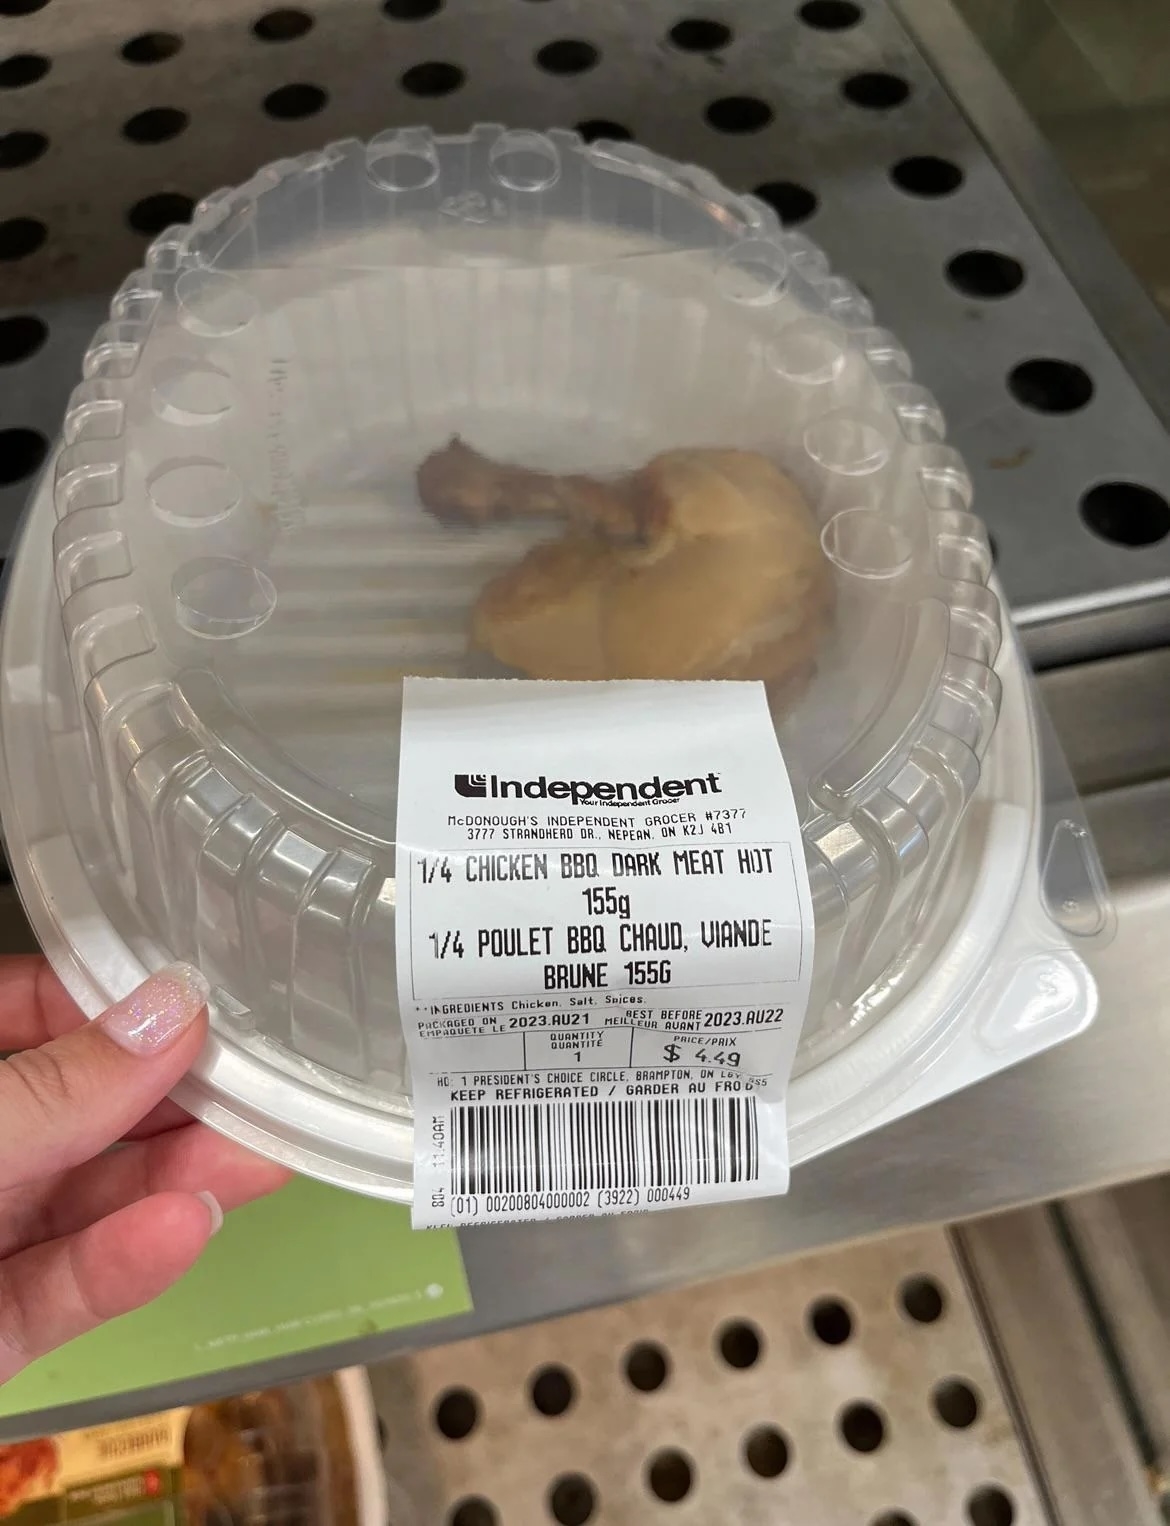 Hand holding a clear plastic container with a partial rotisserie chicken and a label showing product details and pricing